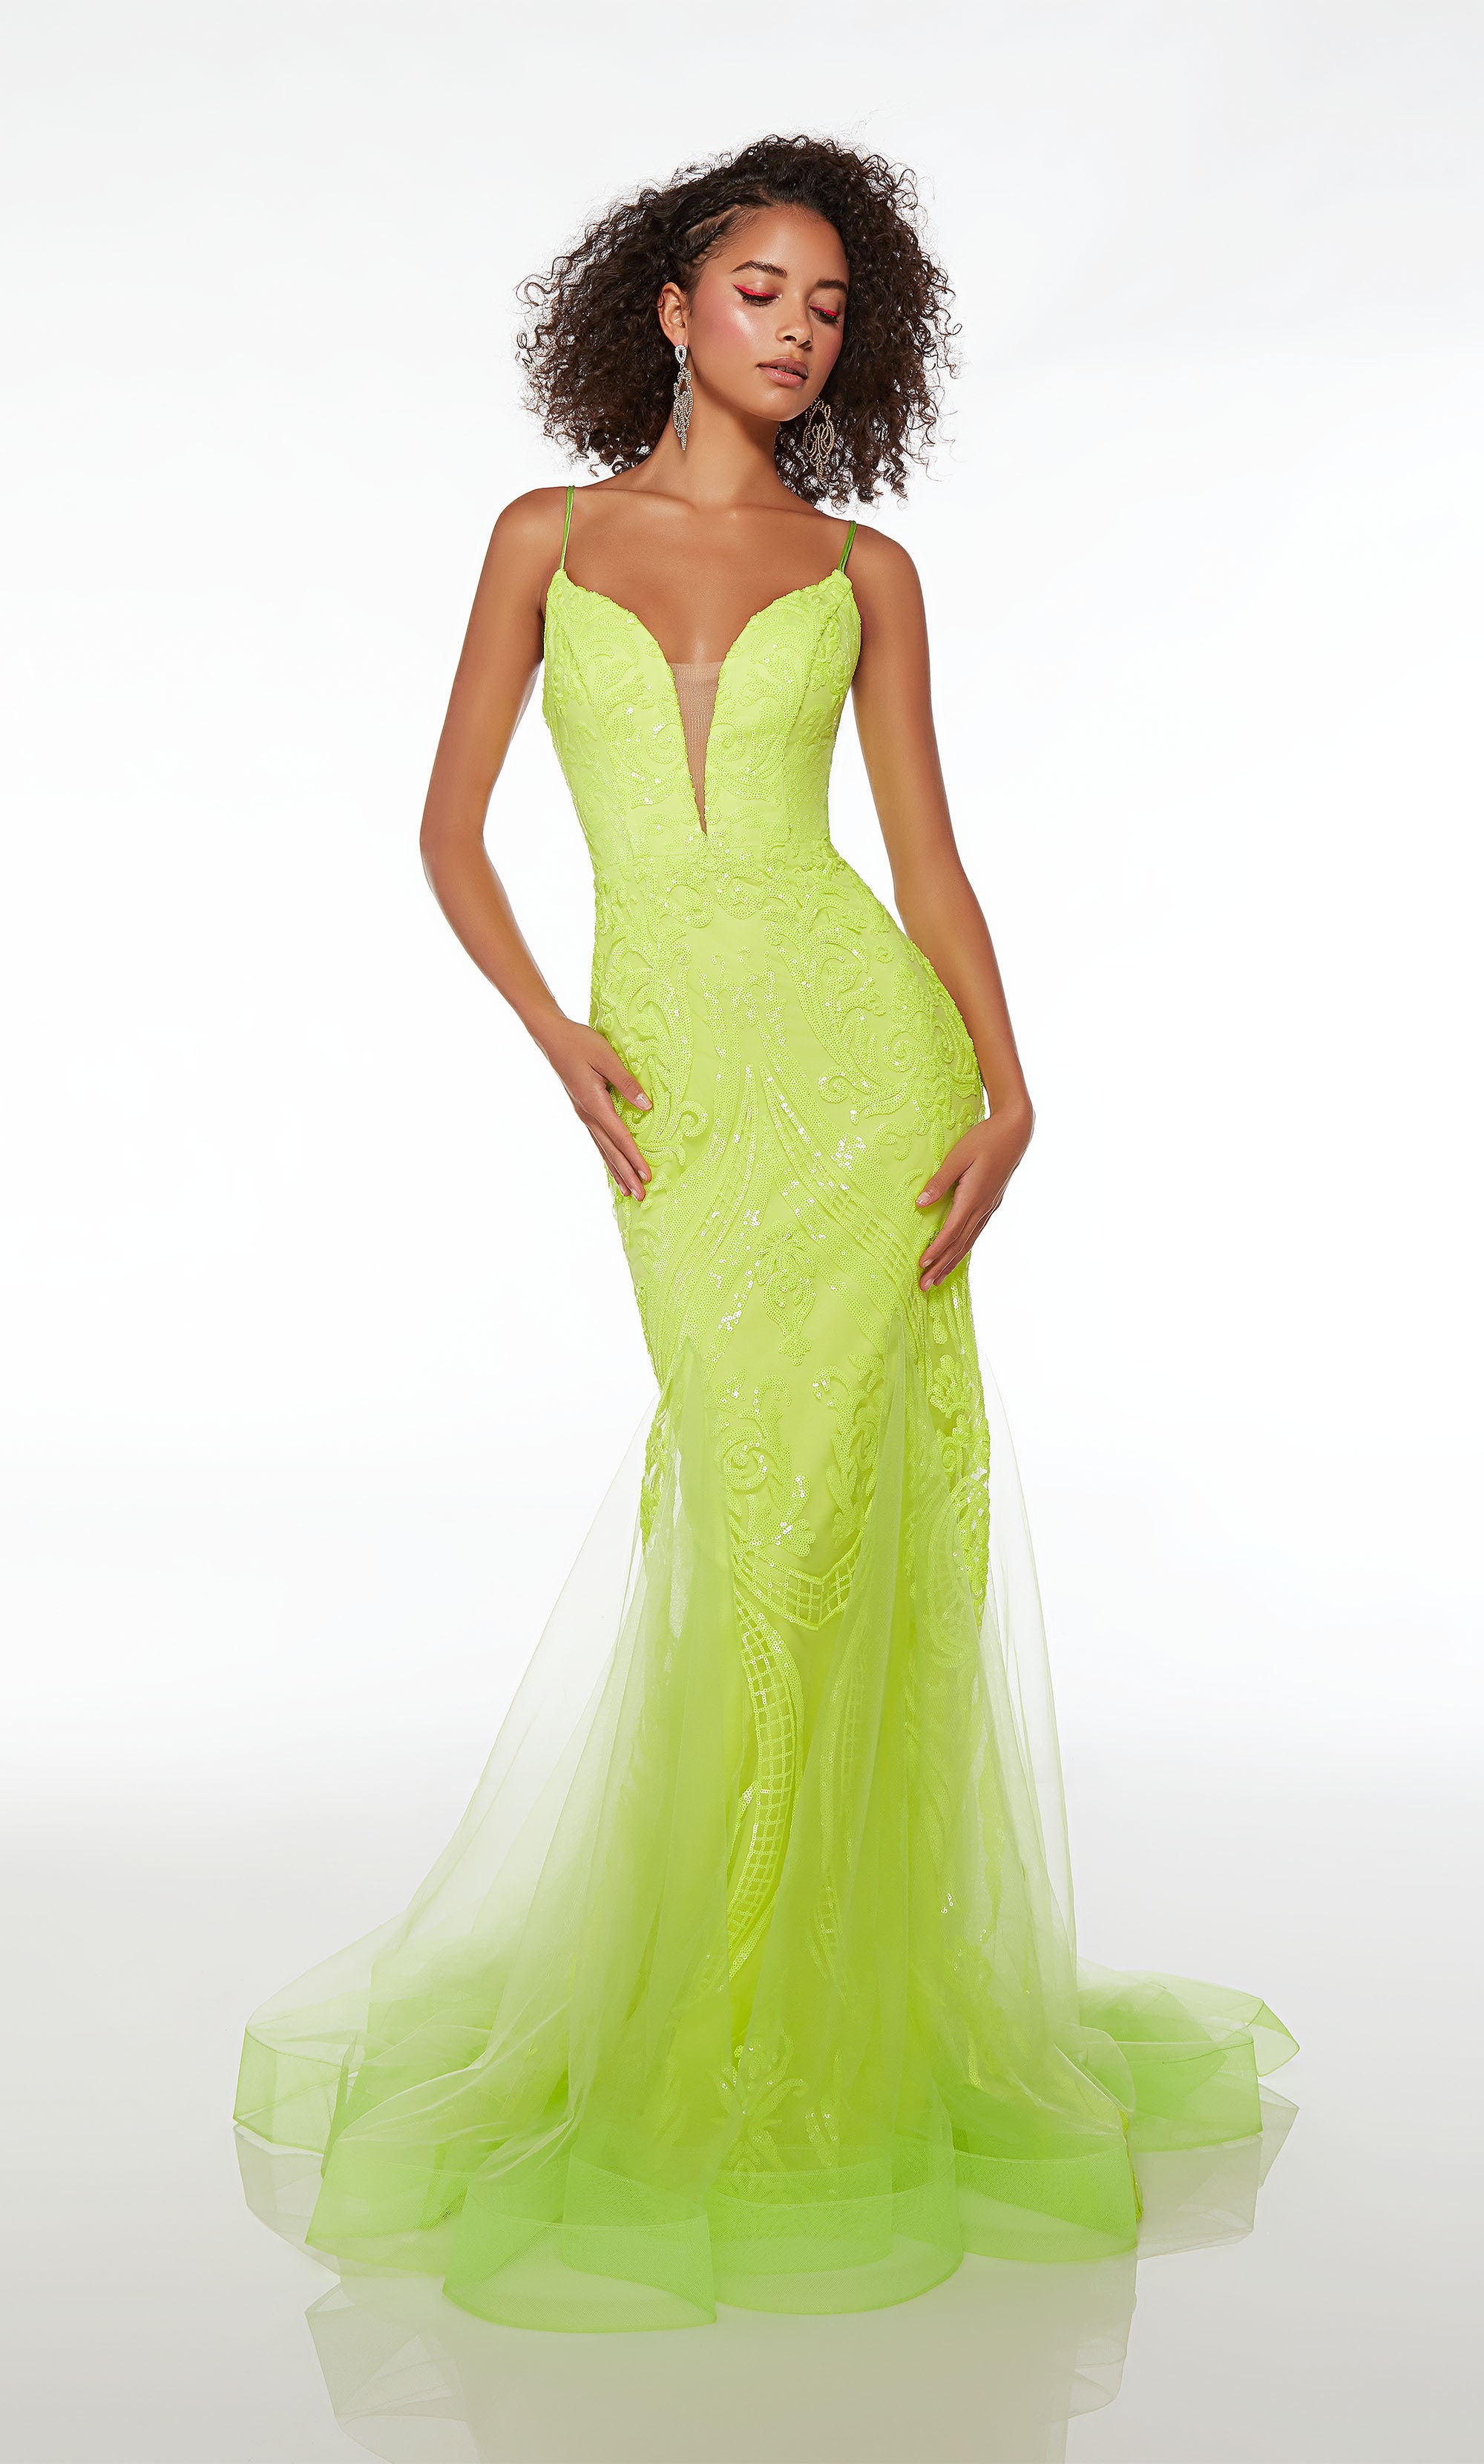 Fitted plunging green prom dress with an lace-up back, fit-and-flare tulle skirt, and paisley sequin design throughout for an stylish and captivating look.